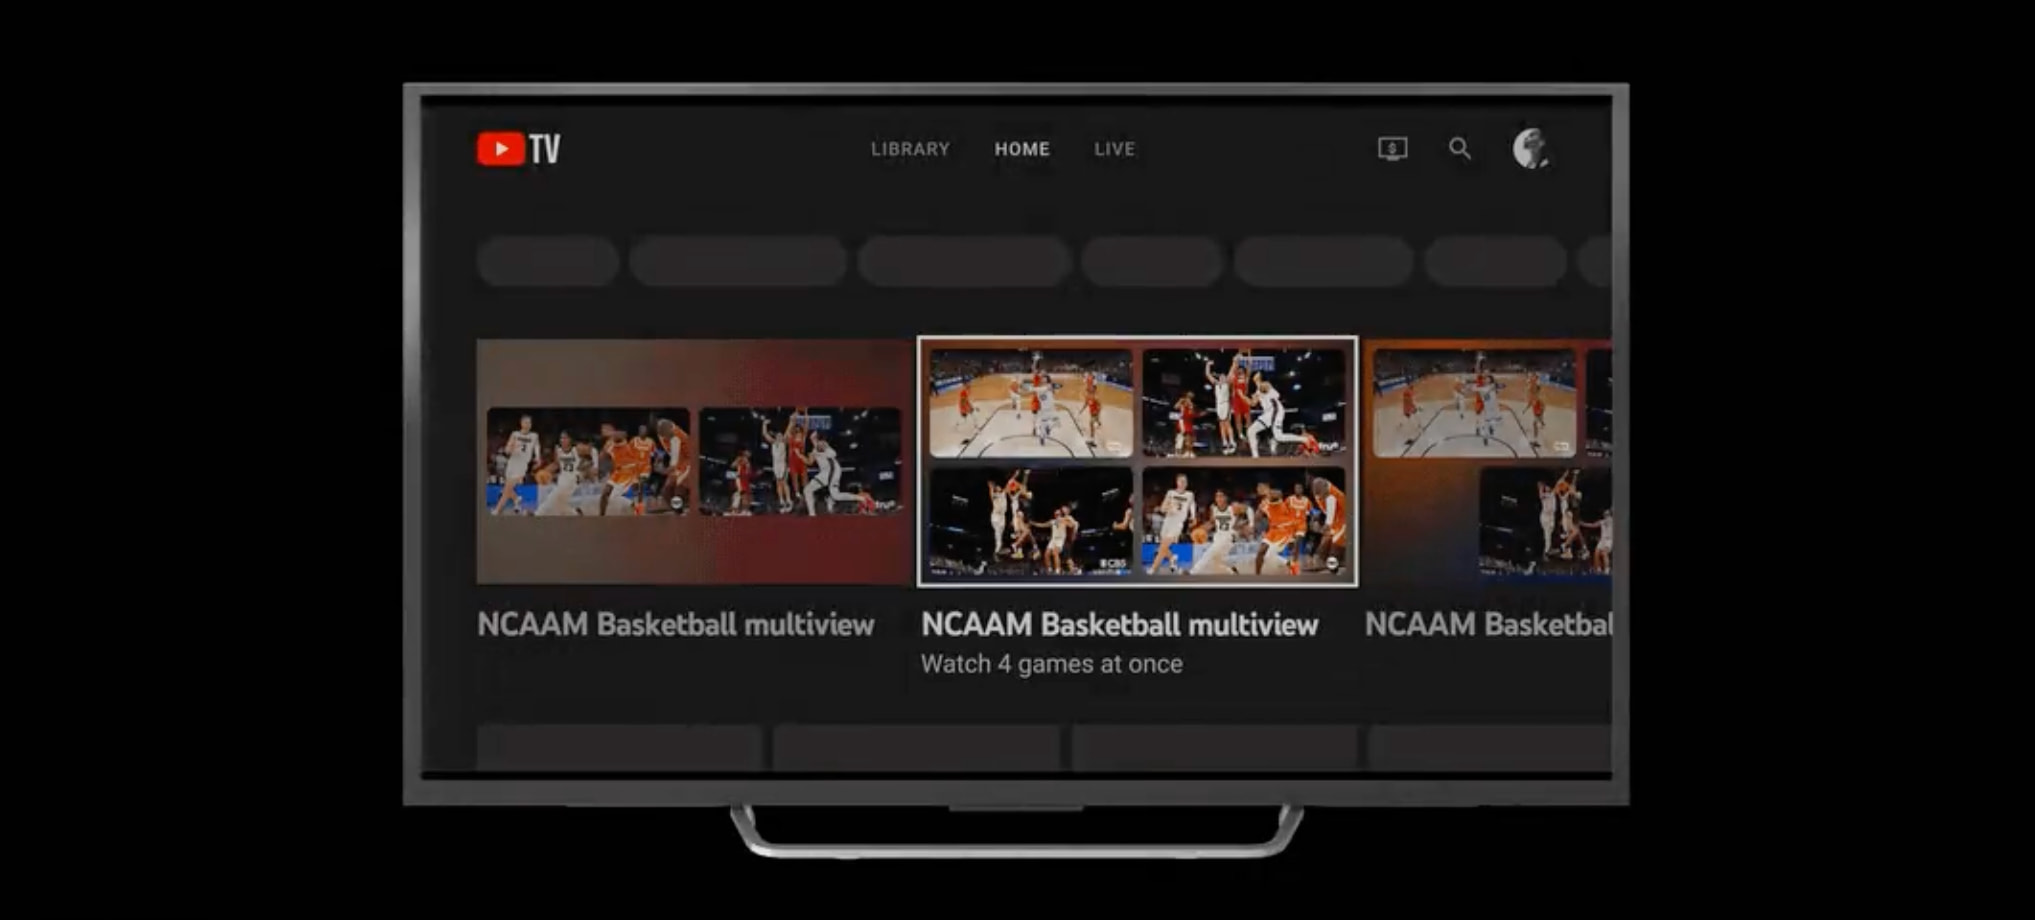 Multiview comes to YouTube and gets official YouTube TV launch